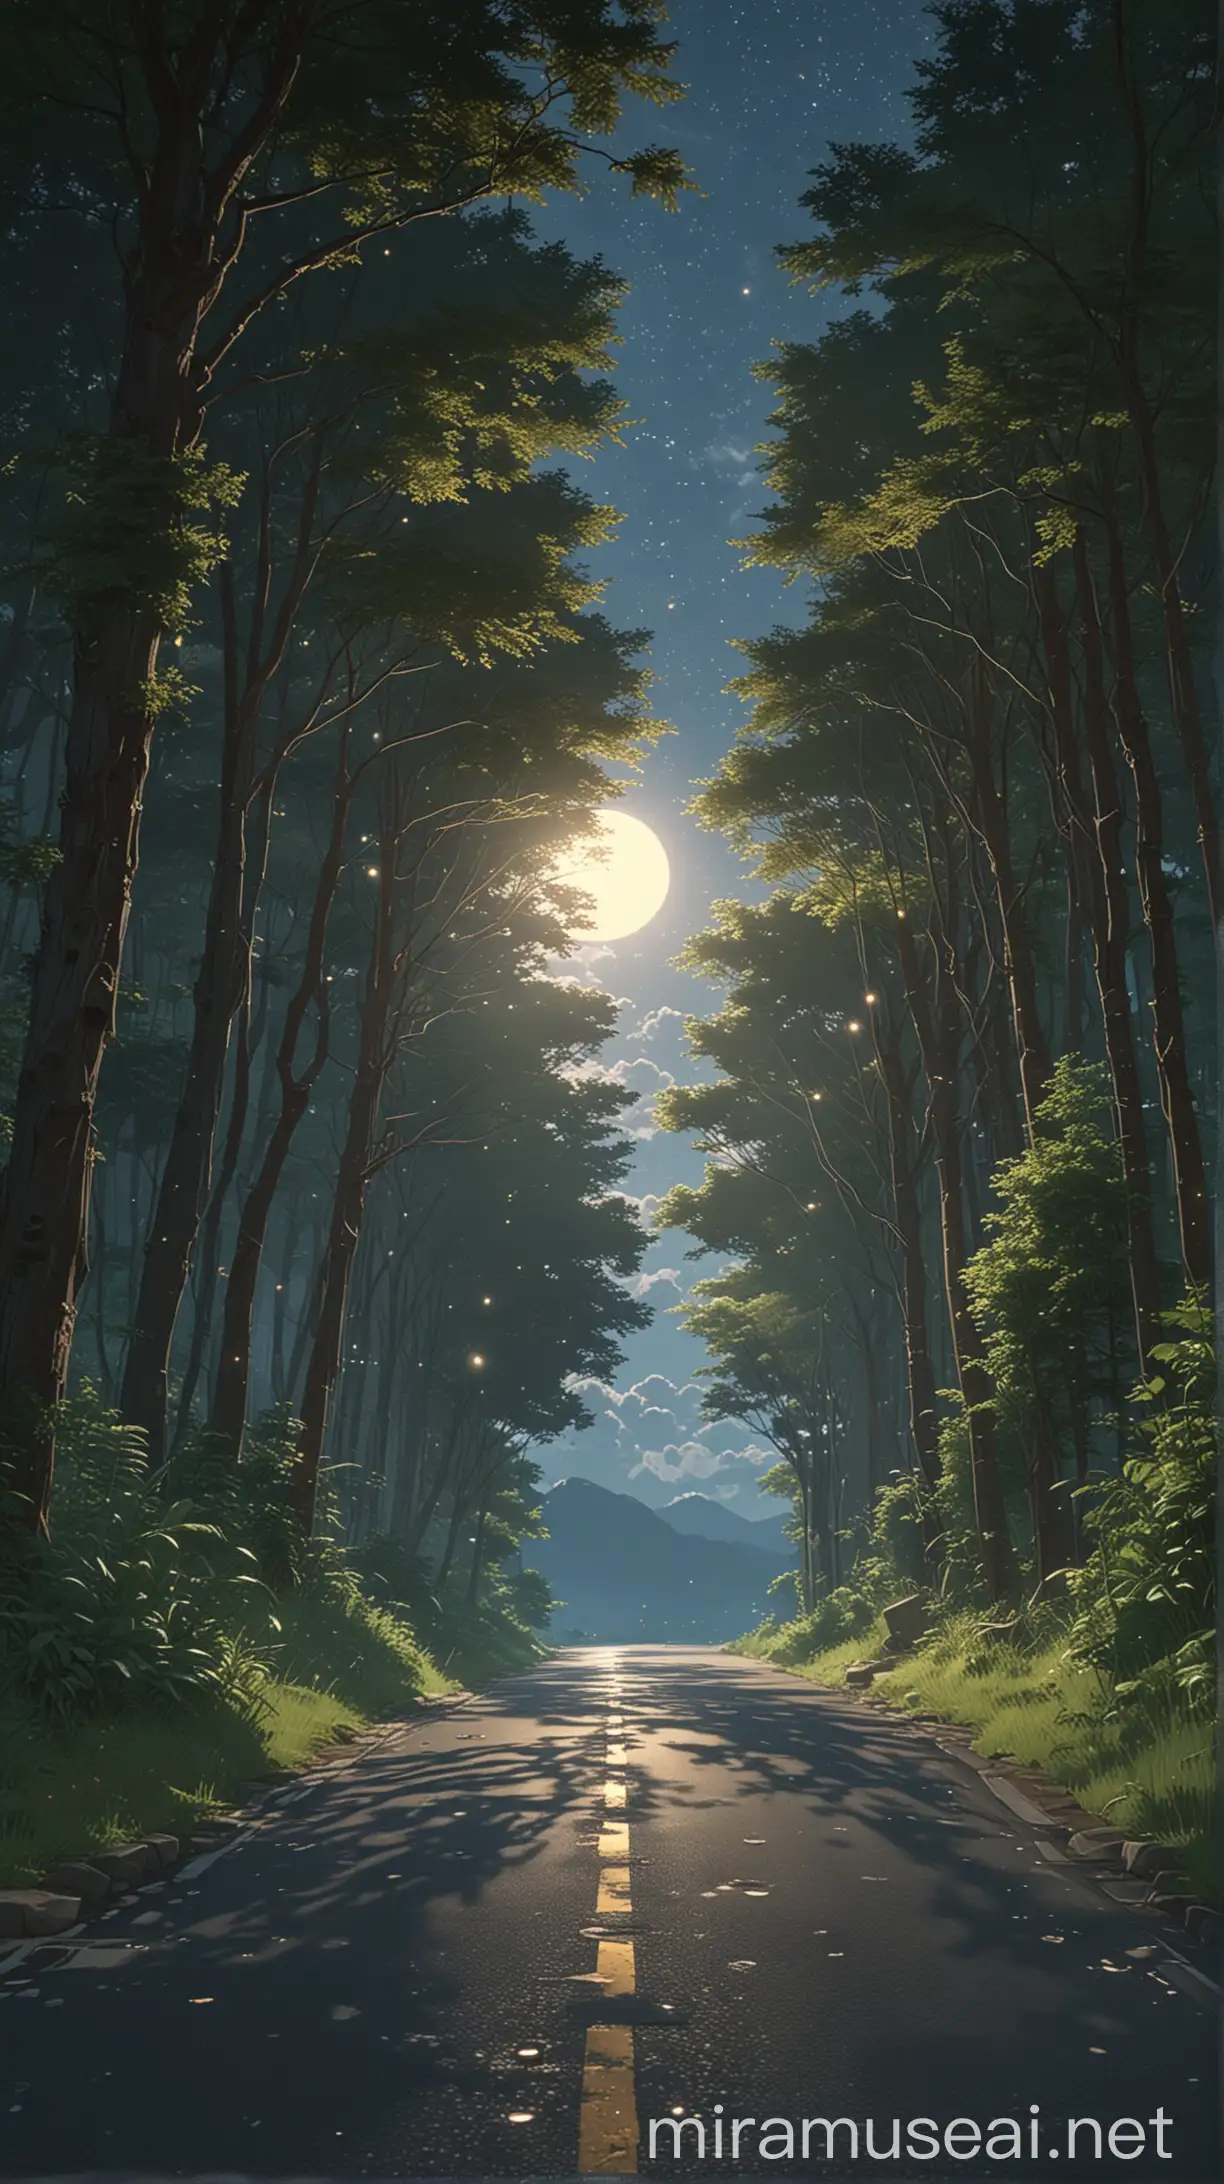 Create an anime-inspired scene of a serene, winding road at night, flanked by dense, lush trees on either side. The scene is illuminated by the gentle glow of a full moon, casting soft light across the landscape. The night sky is dotted with countless stars, creating a magical atmosphere. This road meanders through the hills, adding a sense of depth and tranquility to the setting. The style blends Makoto Shinkai's intricate and emotive anime style with the whimsical, detailed backgrounds typical of Studio Ghibli. Render the scene in 8K resolution, capturing every delicate detail and texture, from the leaves rustling in the breeze to the moonlight dancing on the road